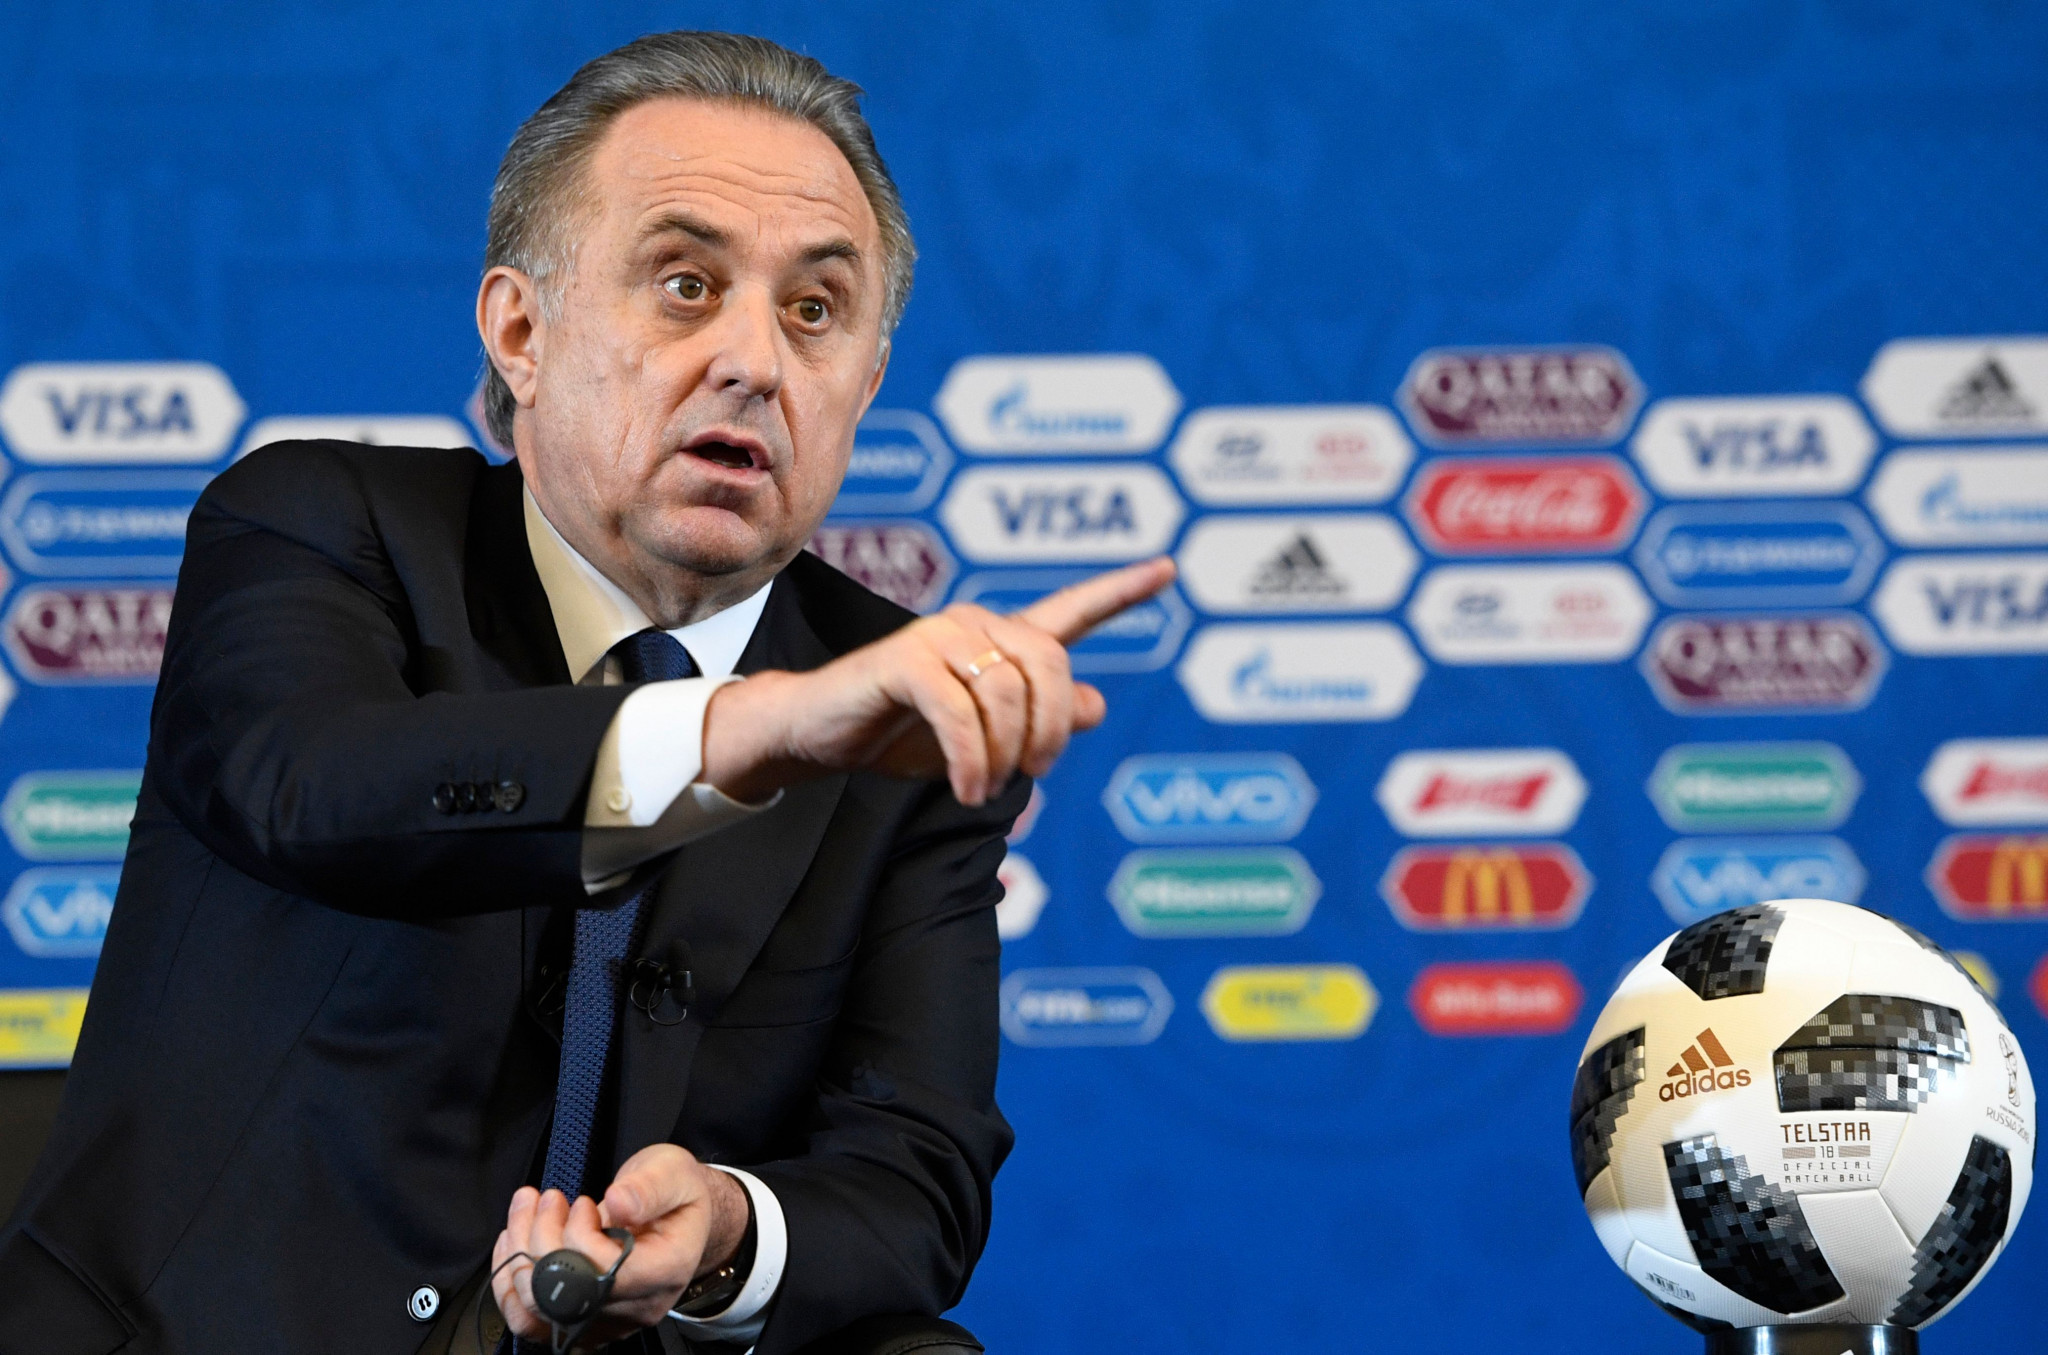 Russian Deputy Prime Minister Vitaly Mutko launched a fierce attack against critics of the country at the pre-draw press conference for the draw for the FIFA World Cup ©Getty Images